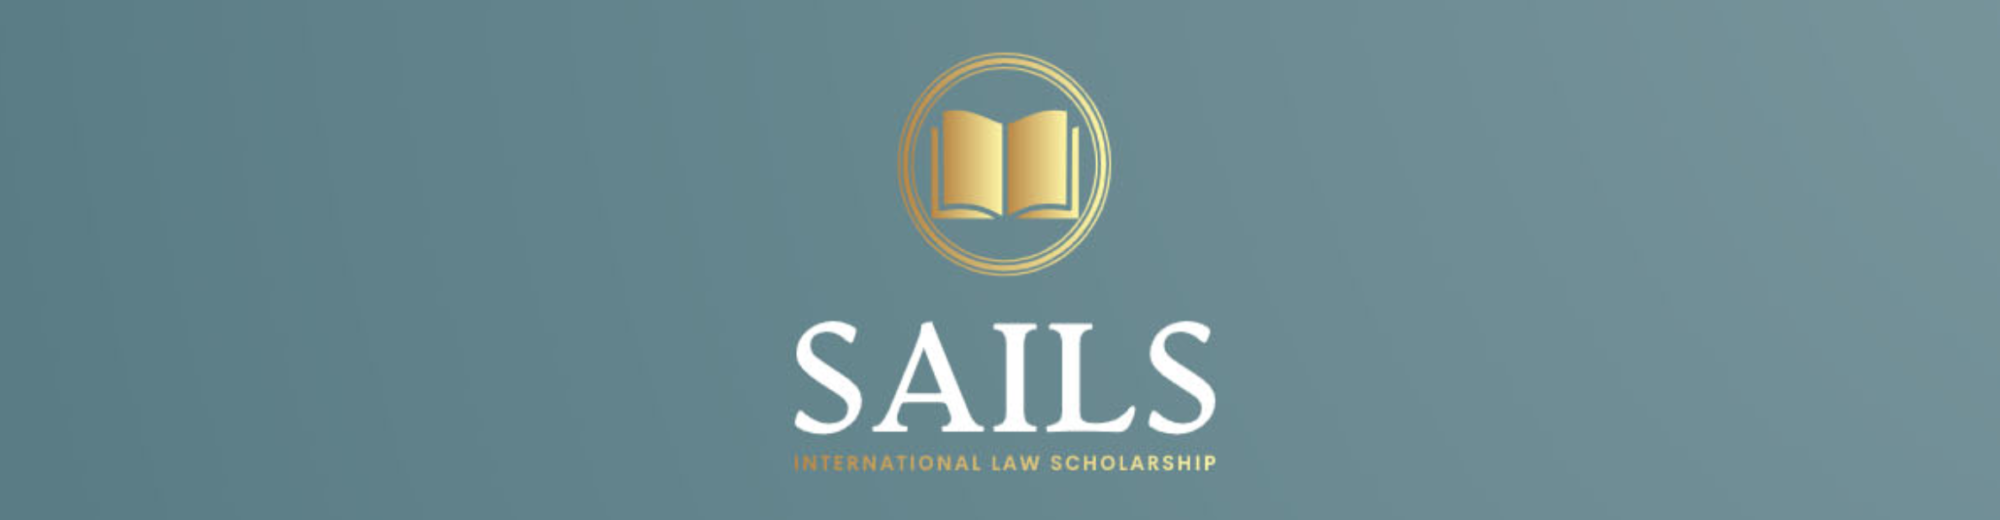 Study and Analysis of International Law Scholarship (SAILS)